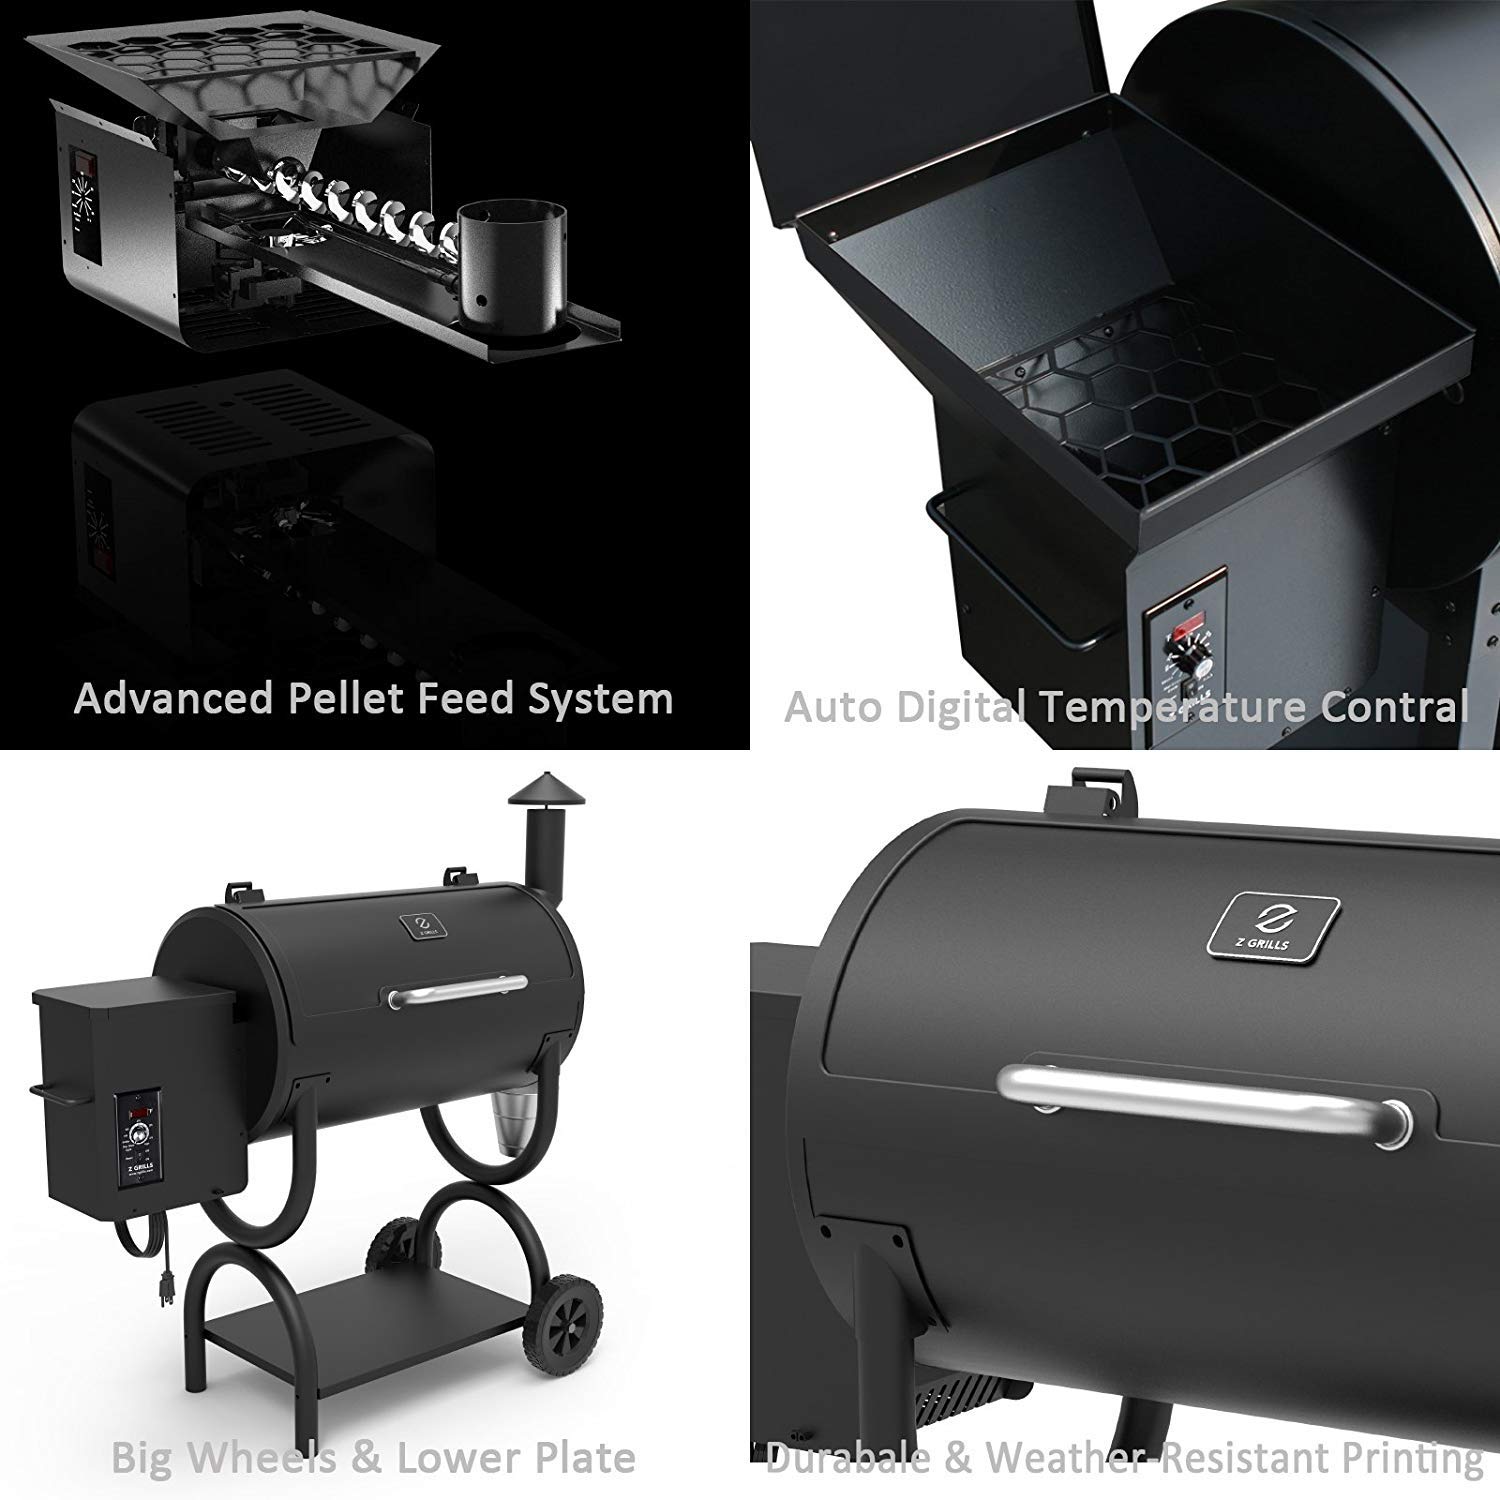 Z GRILLS 550B Wood Pellet Grill & Smoker 8 in 1 BBQ Grill Auto Temperature Control, 550 sq Inch Deal, Black - image 3 of 11